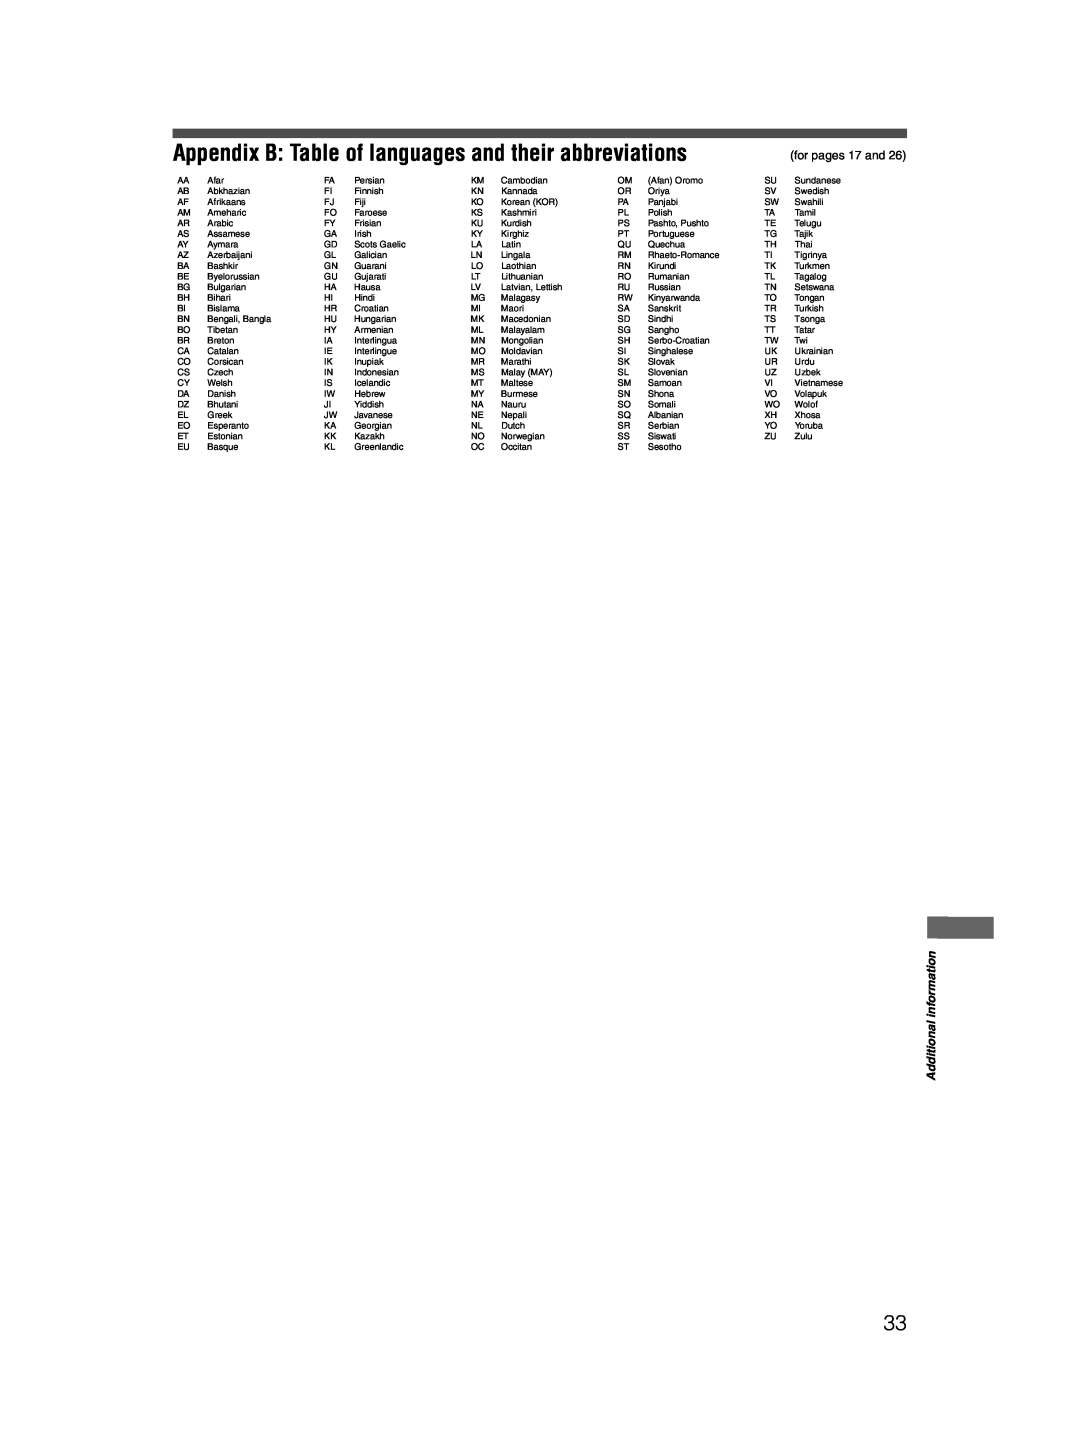 JVC XV-N316S, XV-N315B Appendix B Table of languages and their abbreviations, for pages 17 and, Additional information 